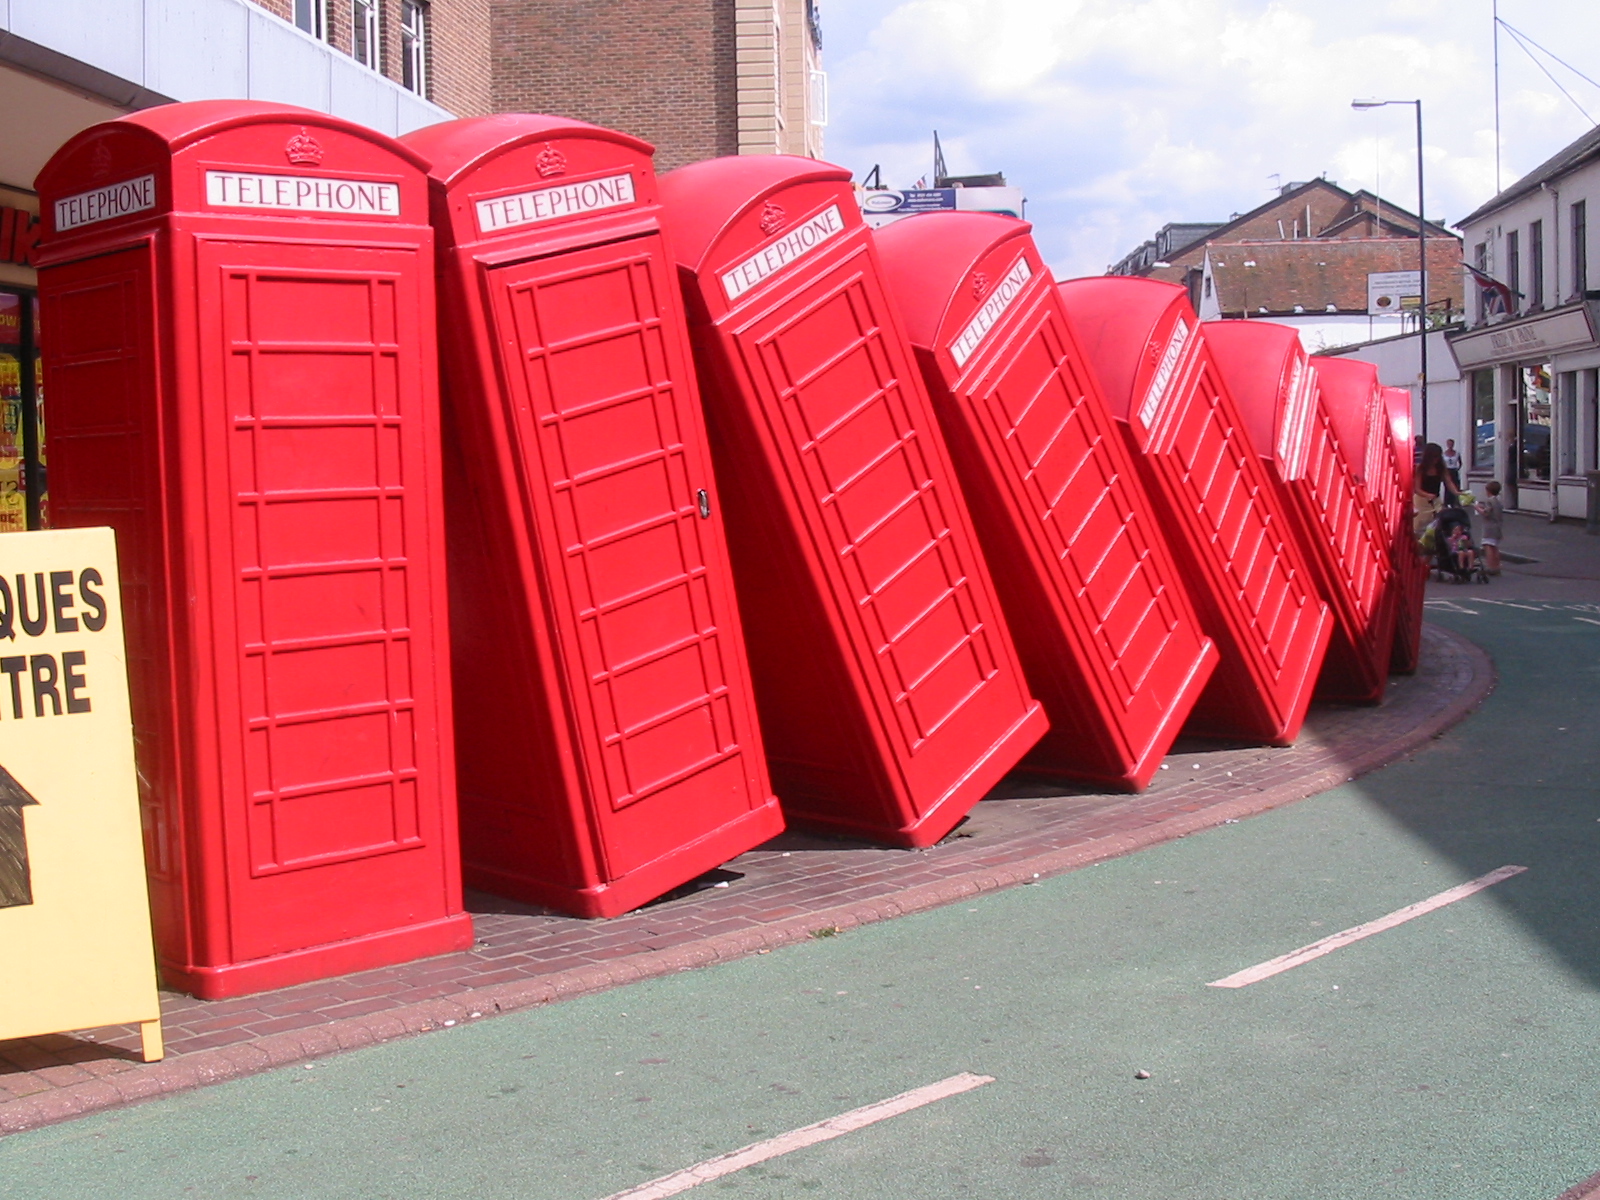 [England-London-Kingston-stacked-domino-like-red-telephone-phone-boxes-phoneboxes-RF.jpg]